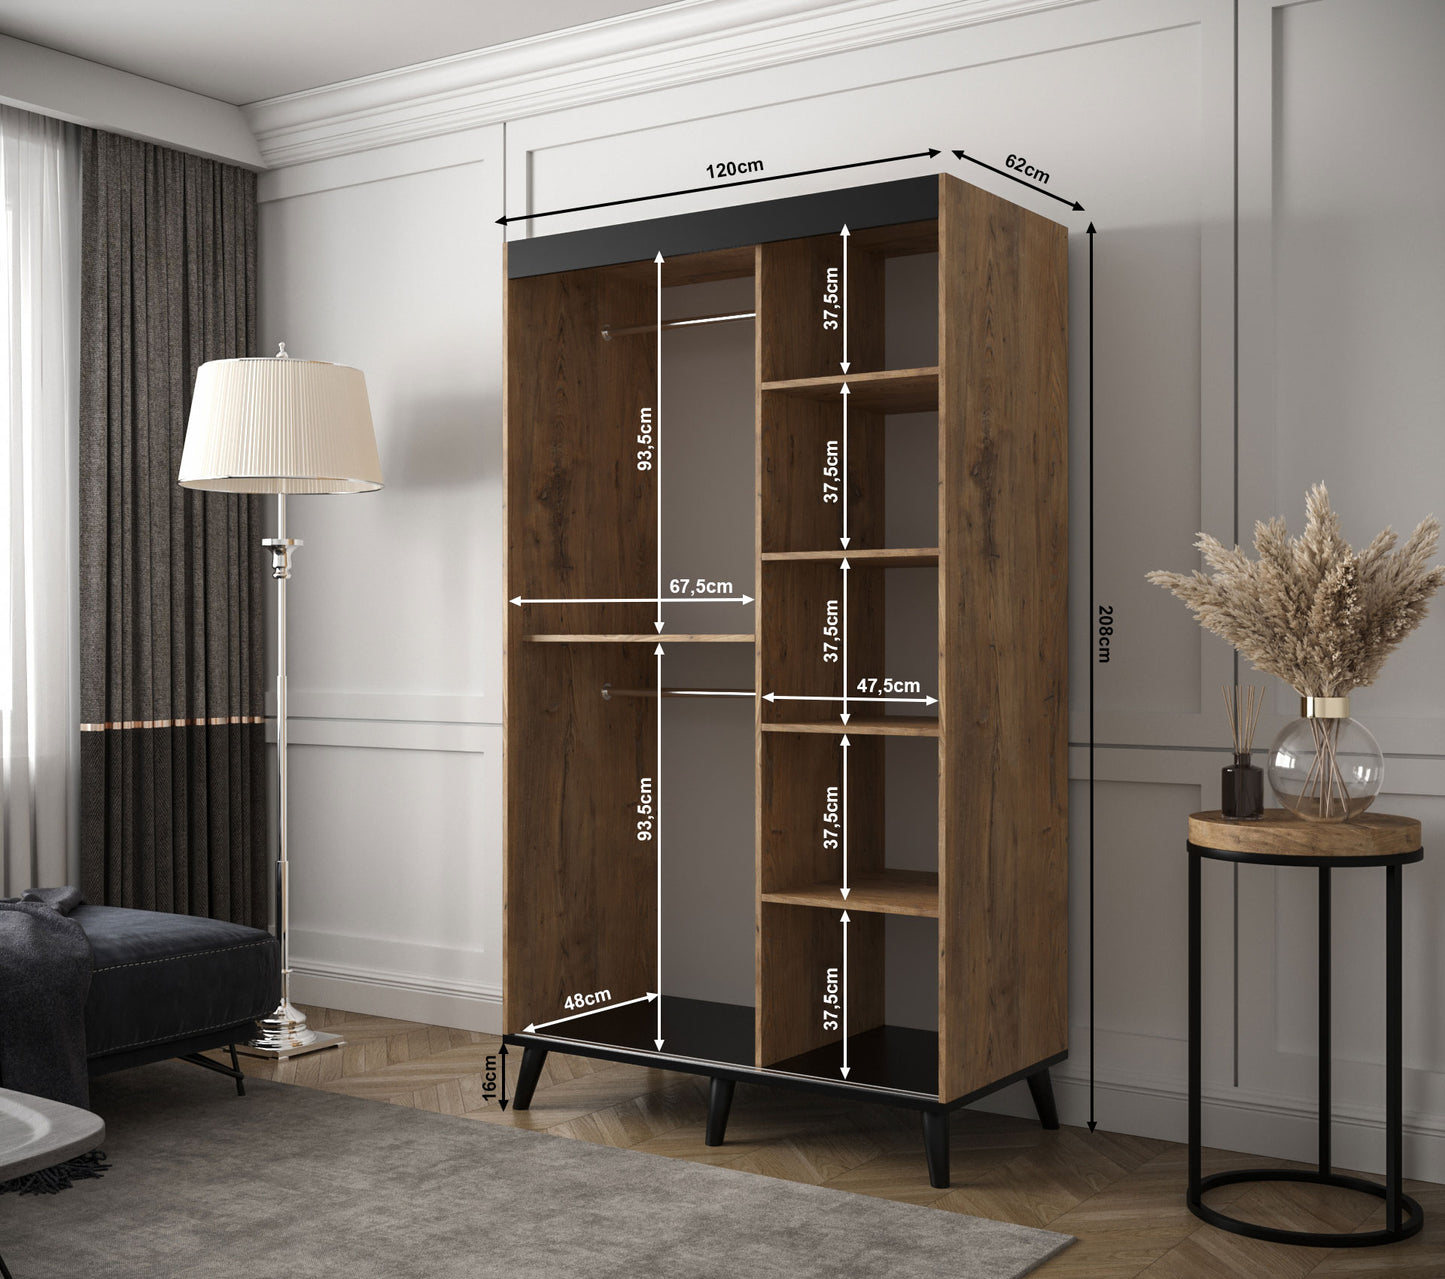 Galicia T3 - Industrial Style Wardrobe Mirrors Shelves Drawers Optional >120 cm x 208 cm<